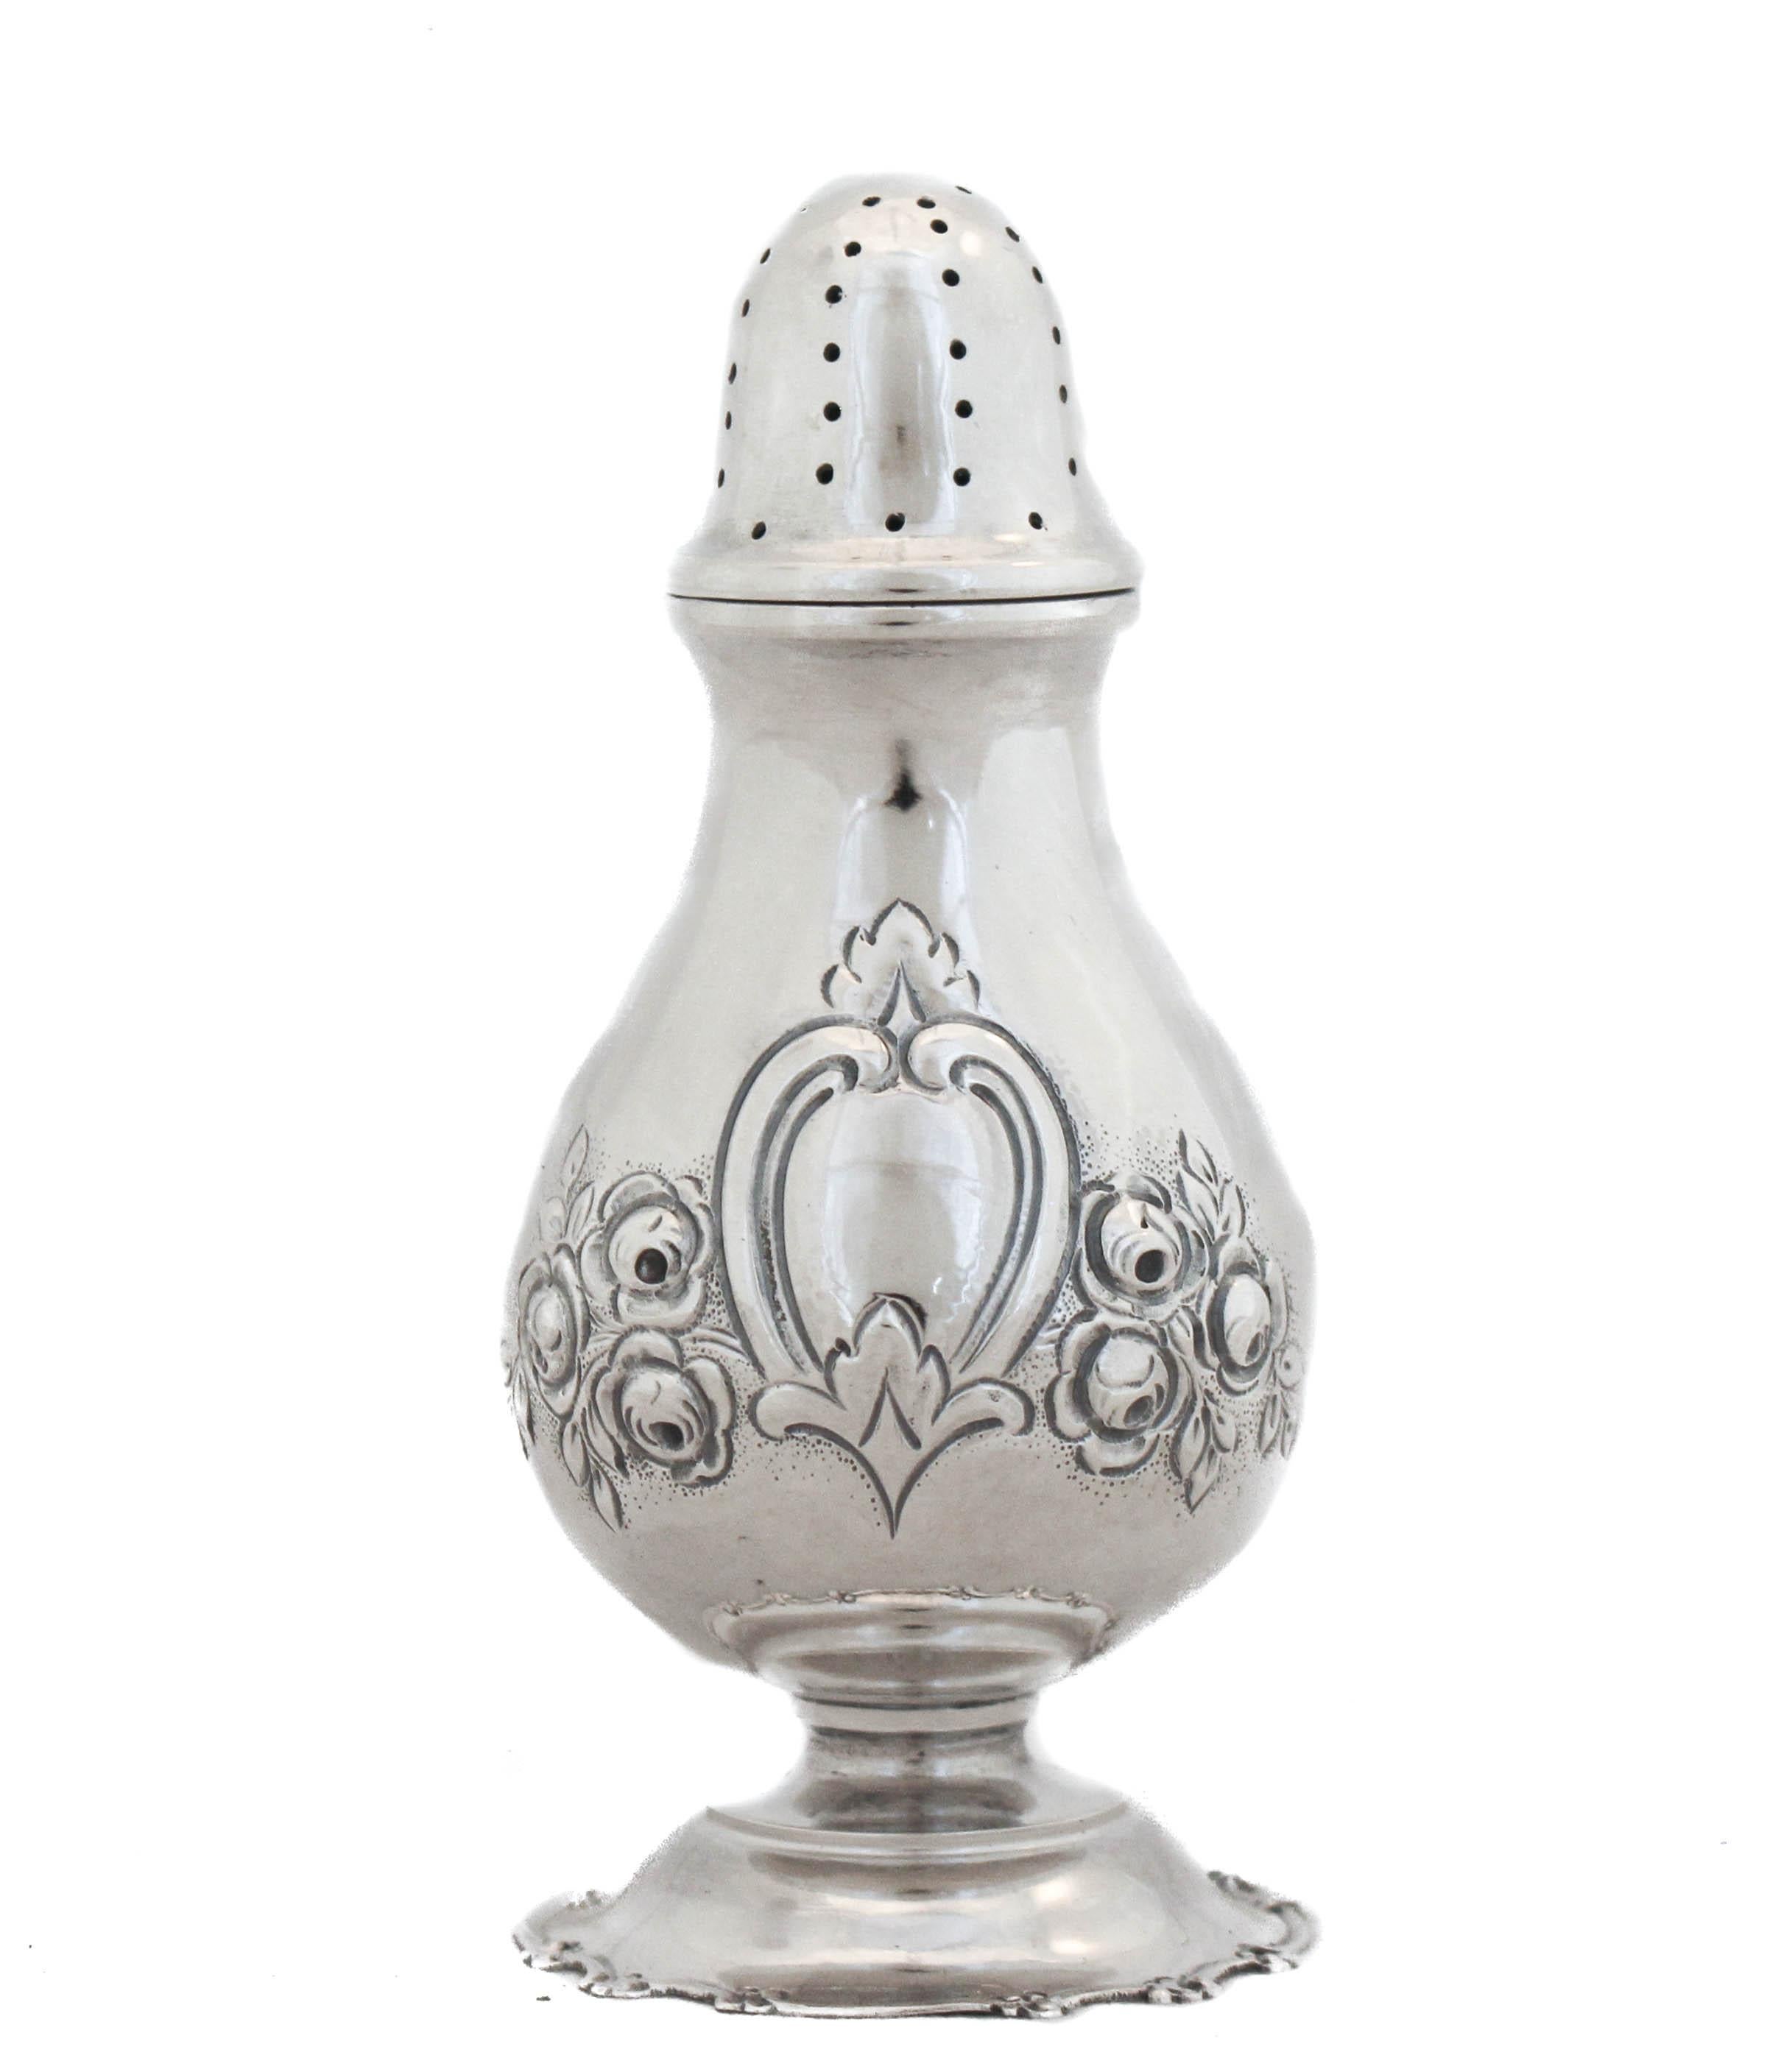 We are delighted to offer you this set of four sterling silver salt shakers. Manufactured in the Austrian-German Empire in the early 20th century. Each shaker has been lovingly restored to it’s original beauty. All dings, dents and scratches have